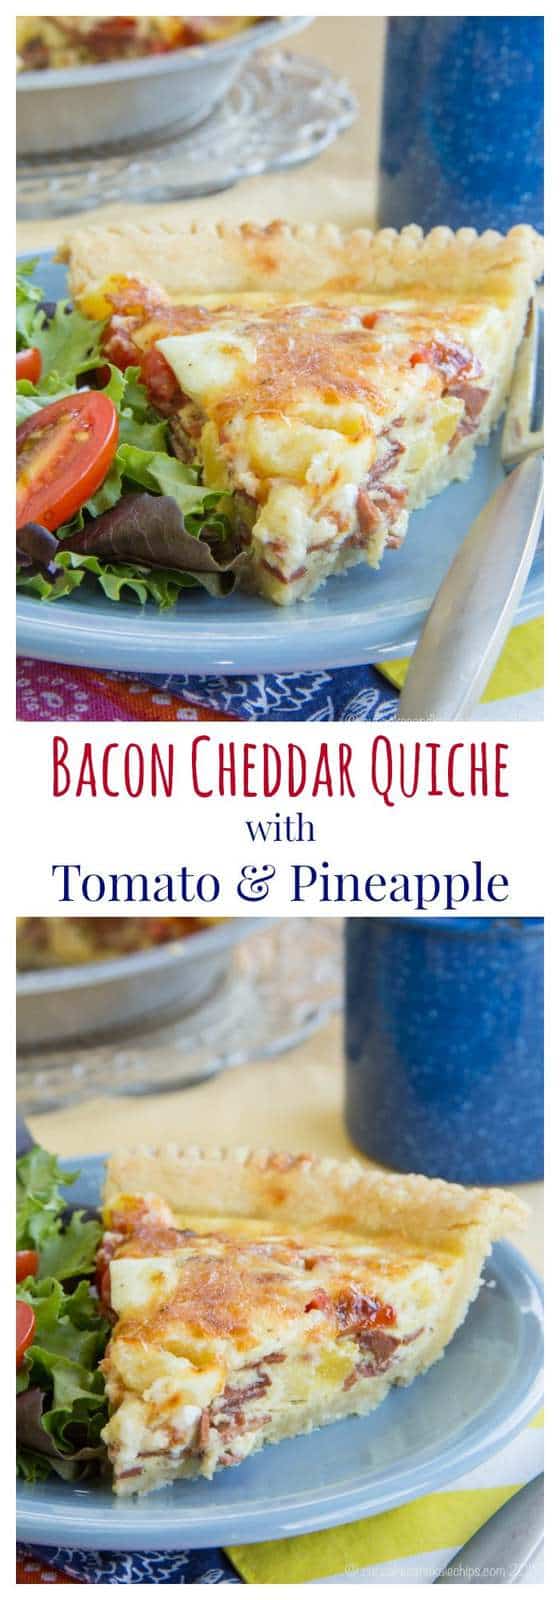 Bacon Cheddar Quiche with Tomato and Pineapple - a salty sweet breakfast or brunch recipe. My family loved this as breakfast for dinner! Use your favorite pie crust recipe, or my new favorite gluten free recipe. | cupcakesandkalechips.com